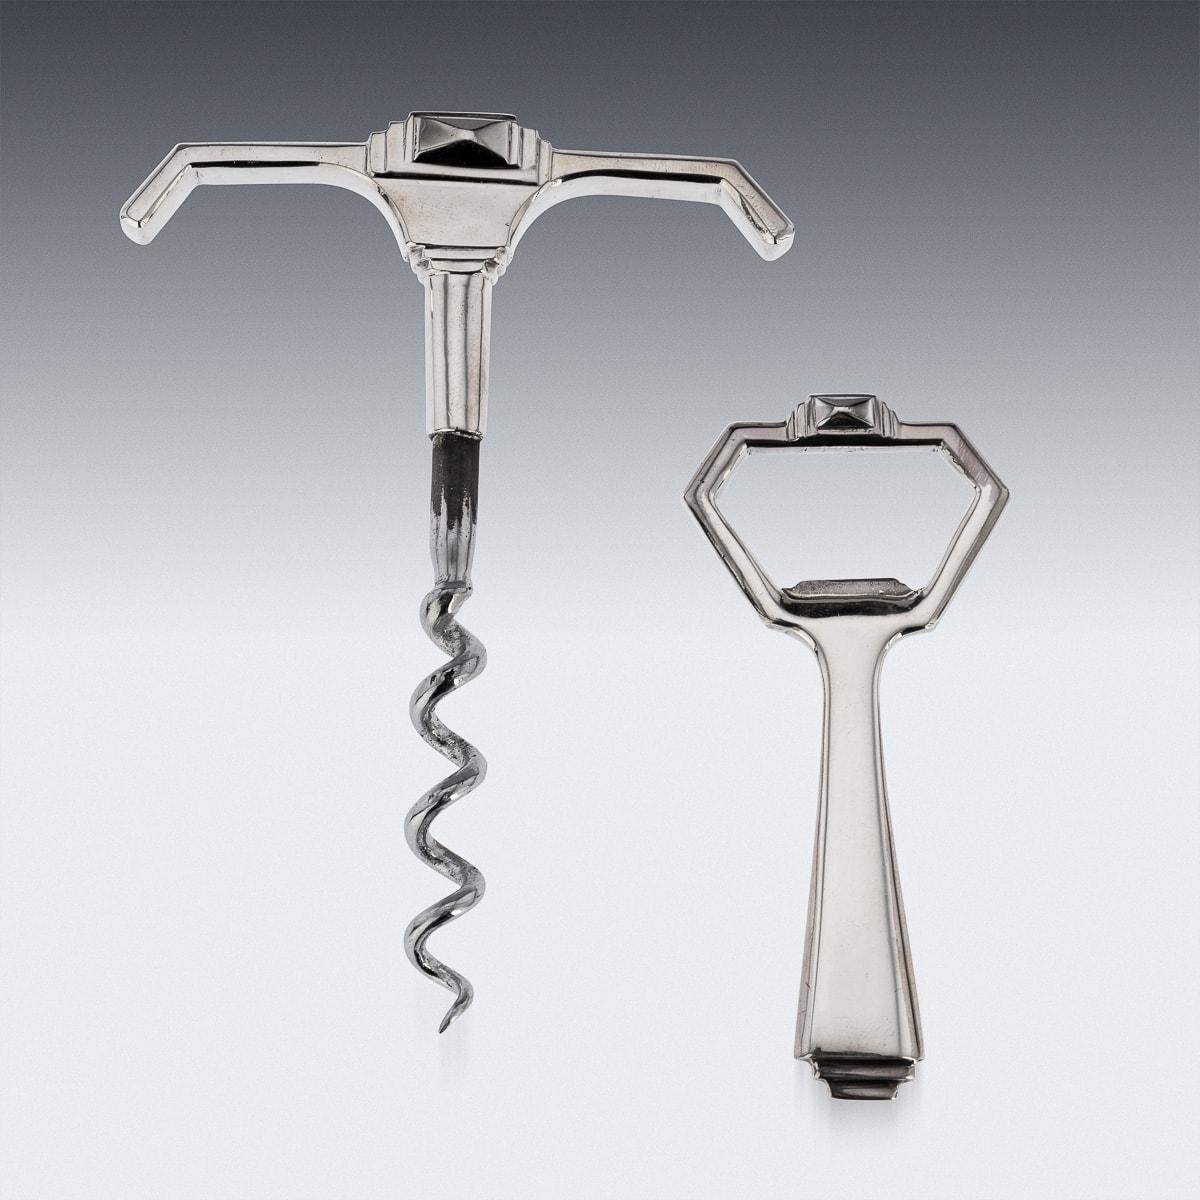 Superb mid-20th Century art deco style solid silver corkscrew and bottle opener, the corkscrew has a steel helix screw mounted on the solid silver handle piece. The bottle opener is solid silver and in the same angled style. This corkscrew and